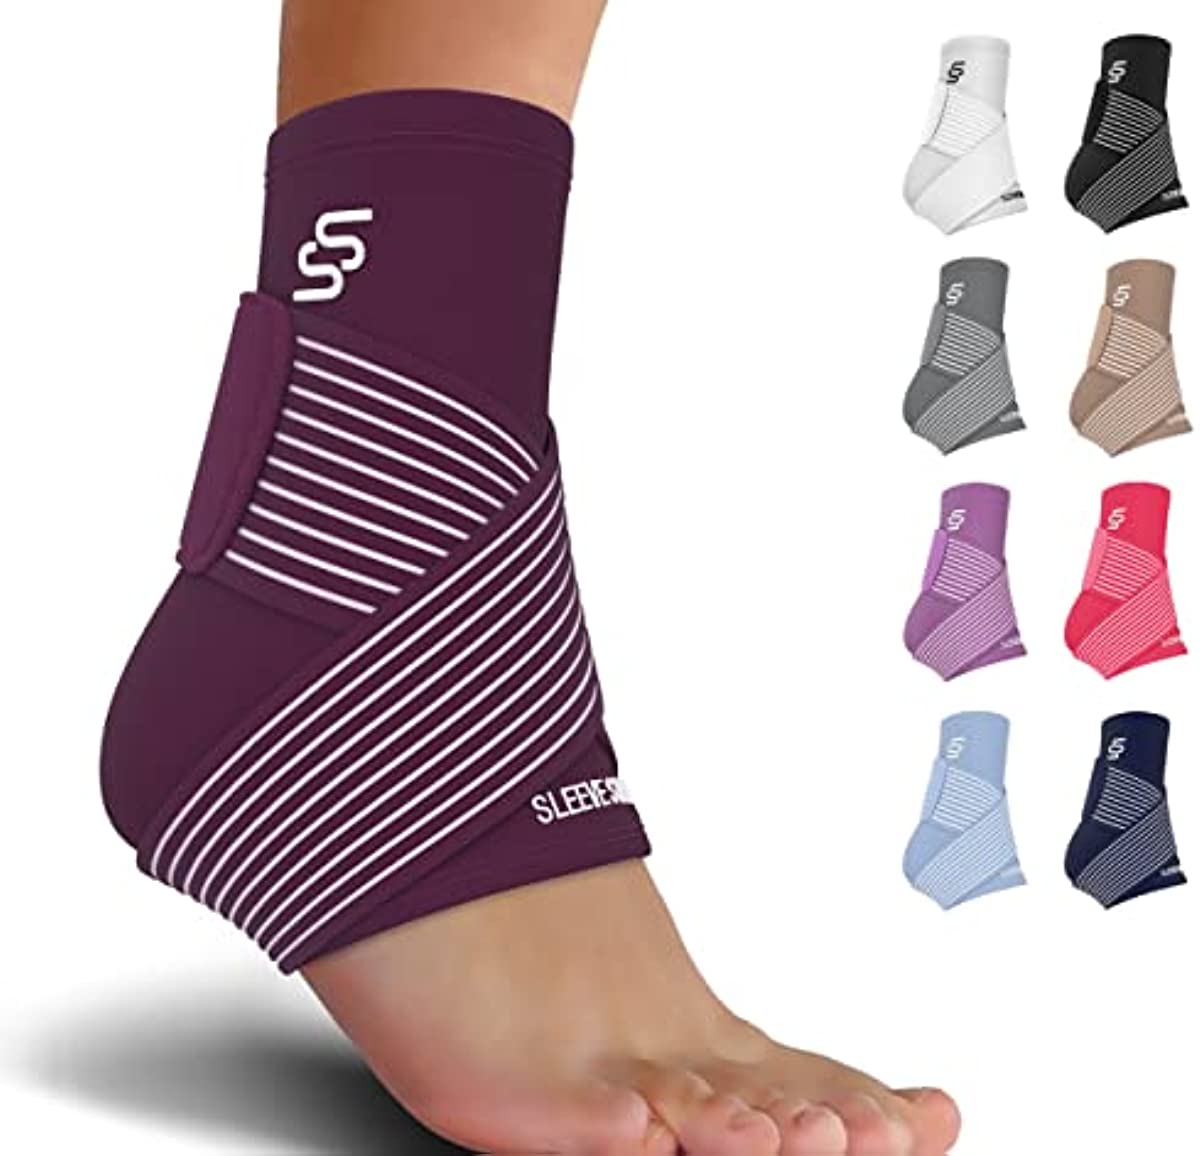 Sleeve Stars Ankle Brace for Plantar Fasciitis Relief, Ankle Wrap & Ankle Brace for Women & Men w/ Ankle Support Strap for Sprained Ankle & Heel Protectors Sleeve, Heel Brace for Heel Pain (Single/Dark Purple)